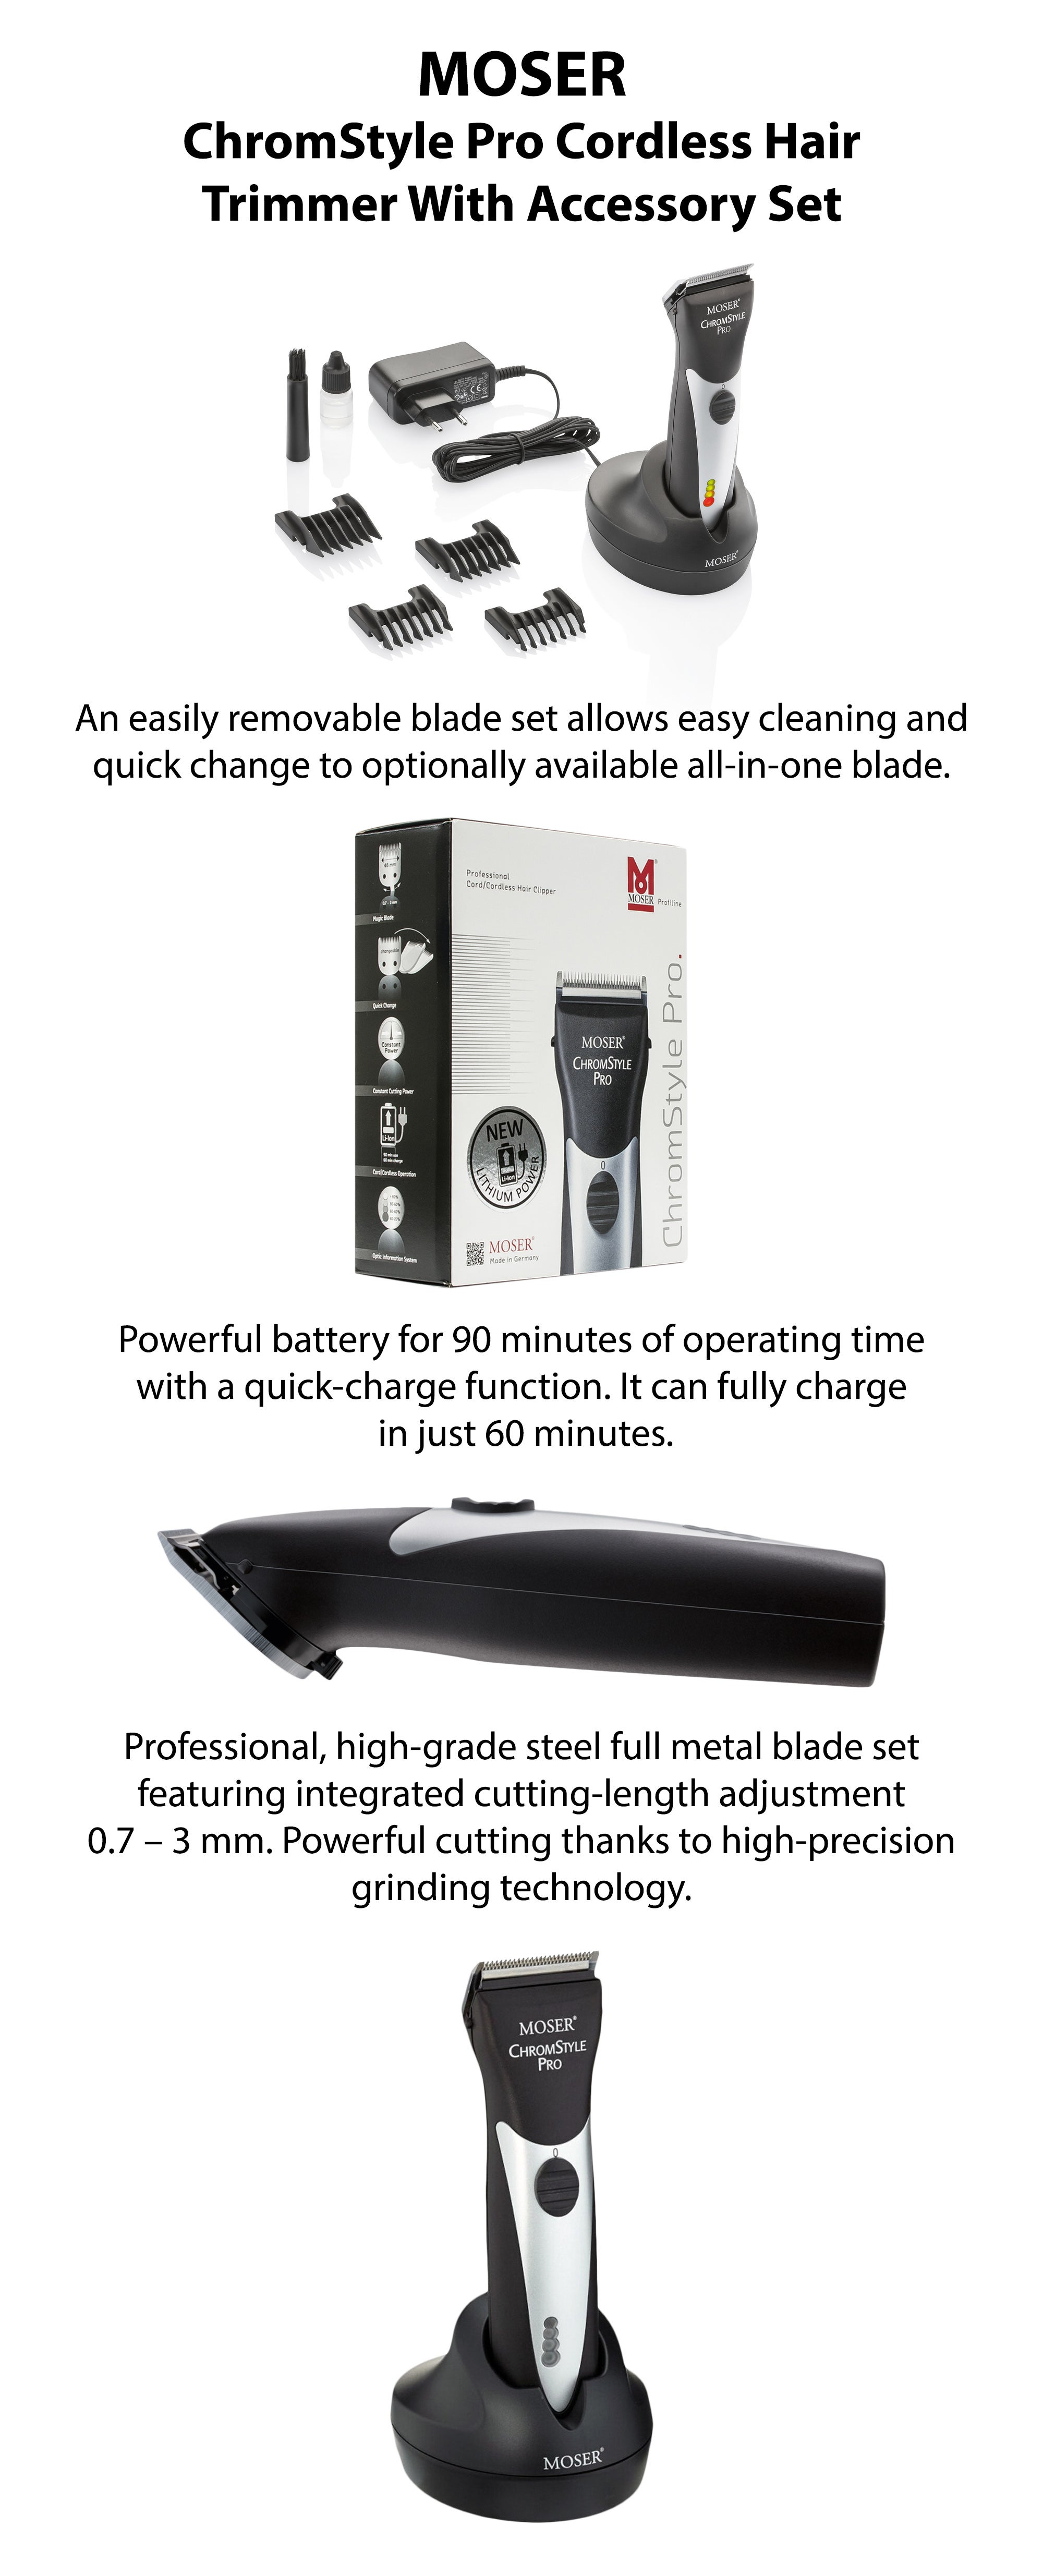 ChromStyle Pro Cordless Hair Trimmer With Accessory Set Black/Sliver